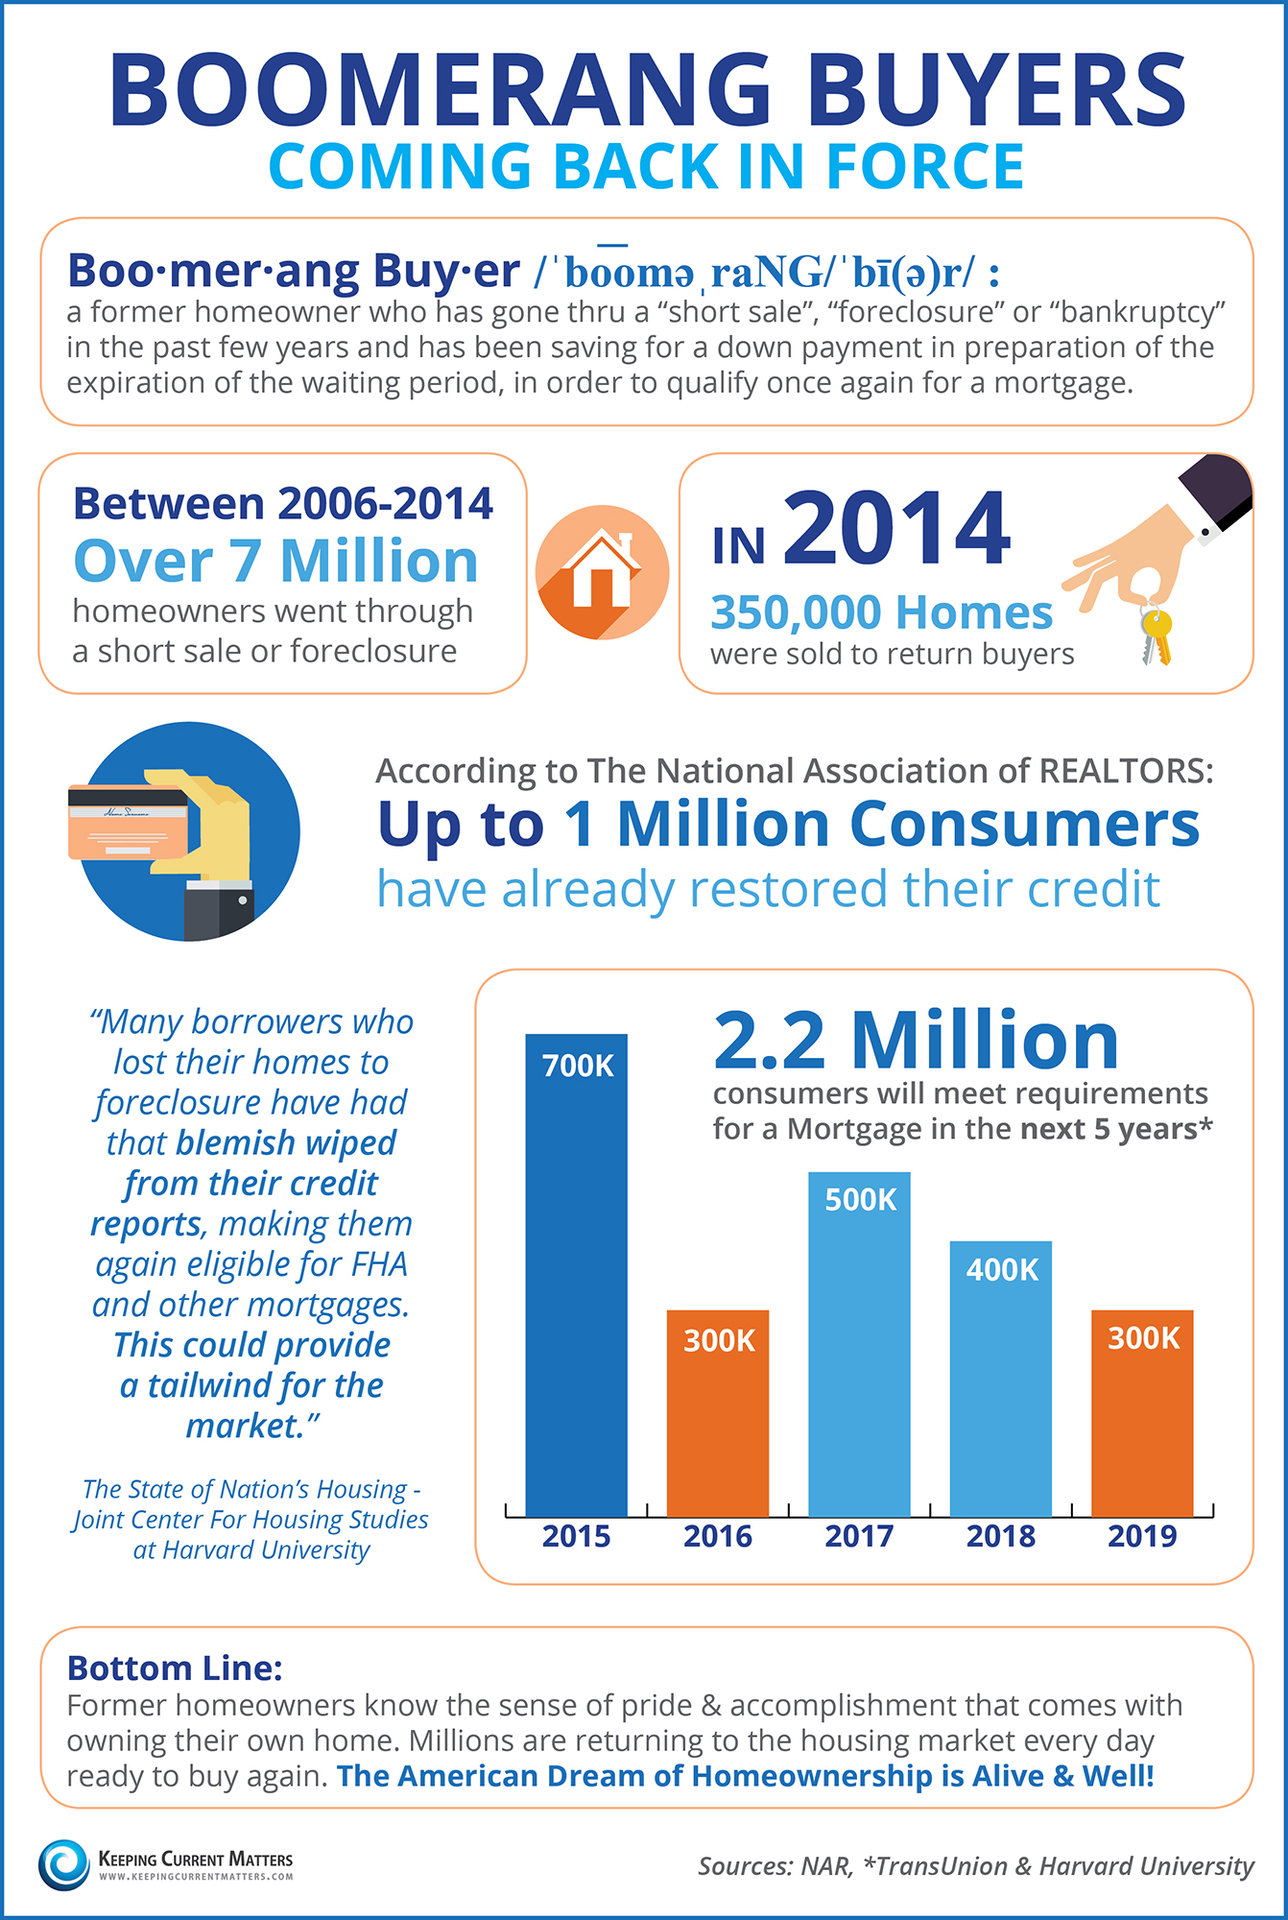 Boomerang Buyers Coming Back in Force [INFOGRAPHIC] | Keeping Current Matters